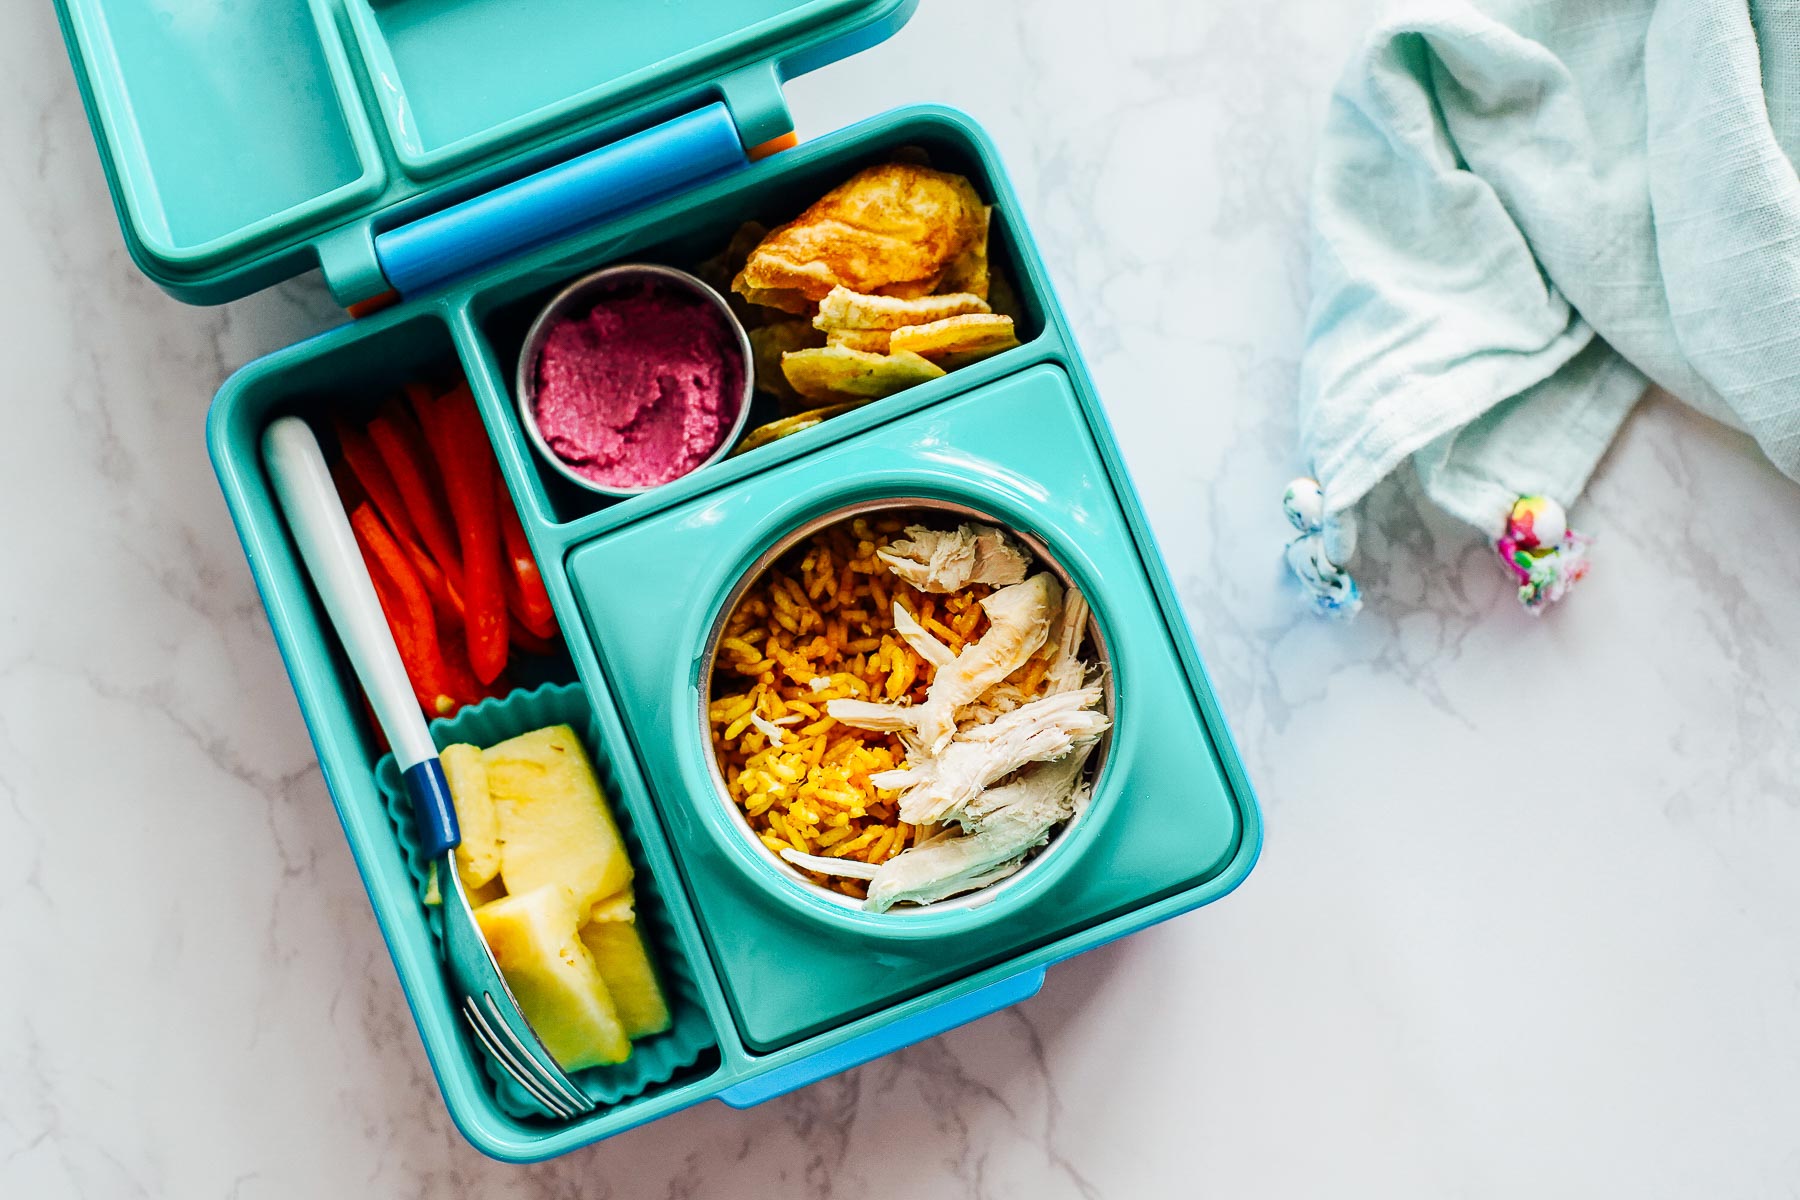 Chicken and yellow rice in a thermos with hummus and plantain chips, pineapple slices, pepper slices in a lunchbox.